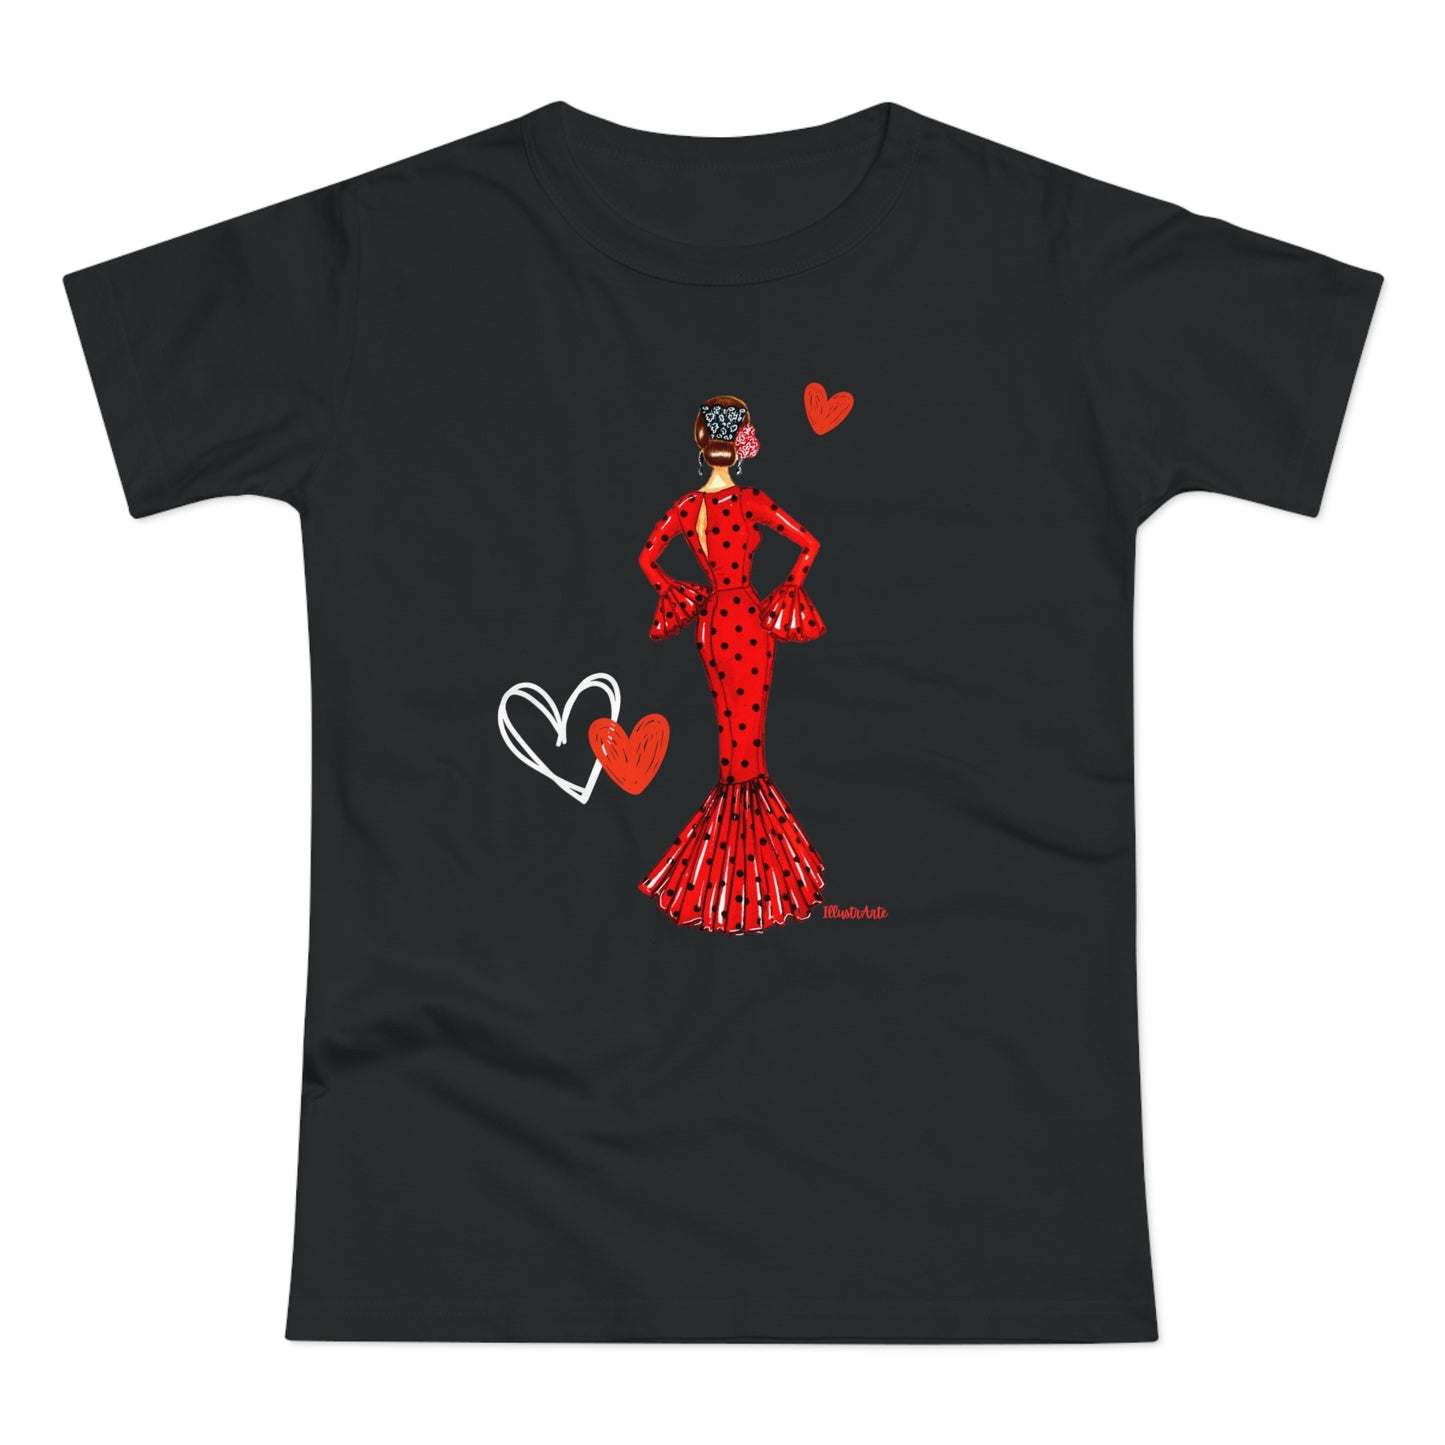 a black t - shirt with a red dress and hearts